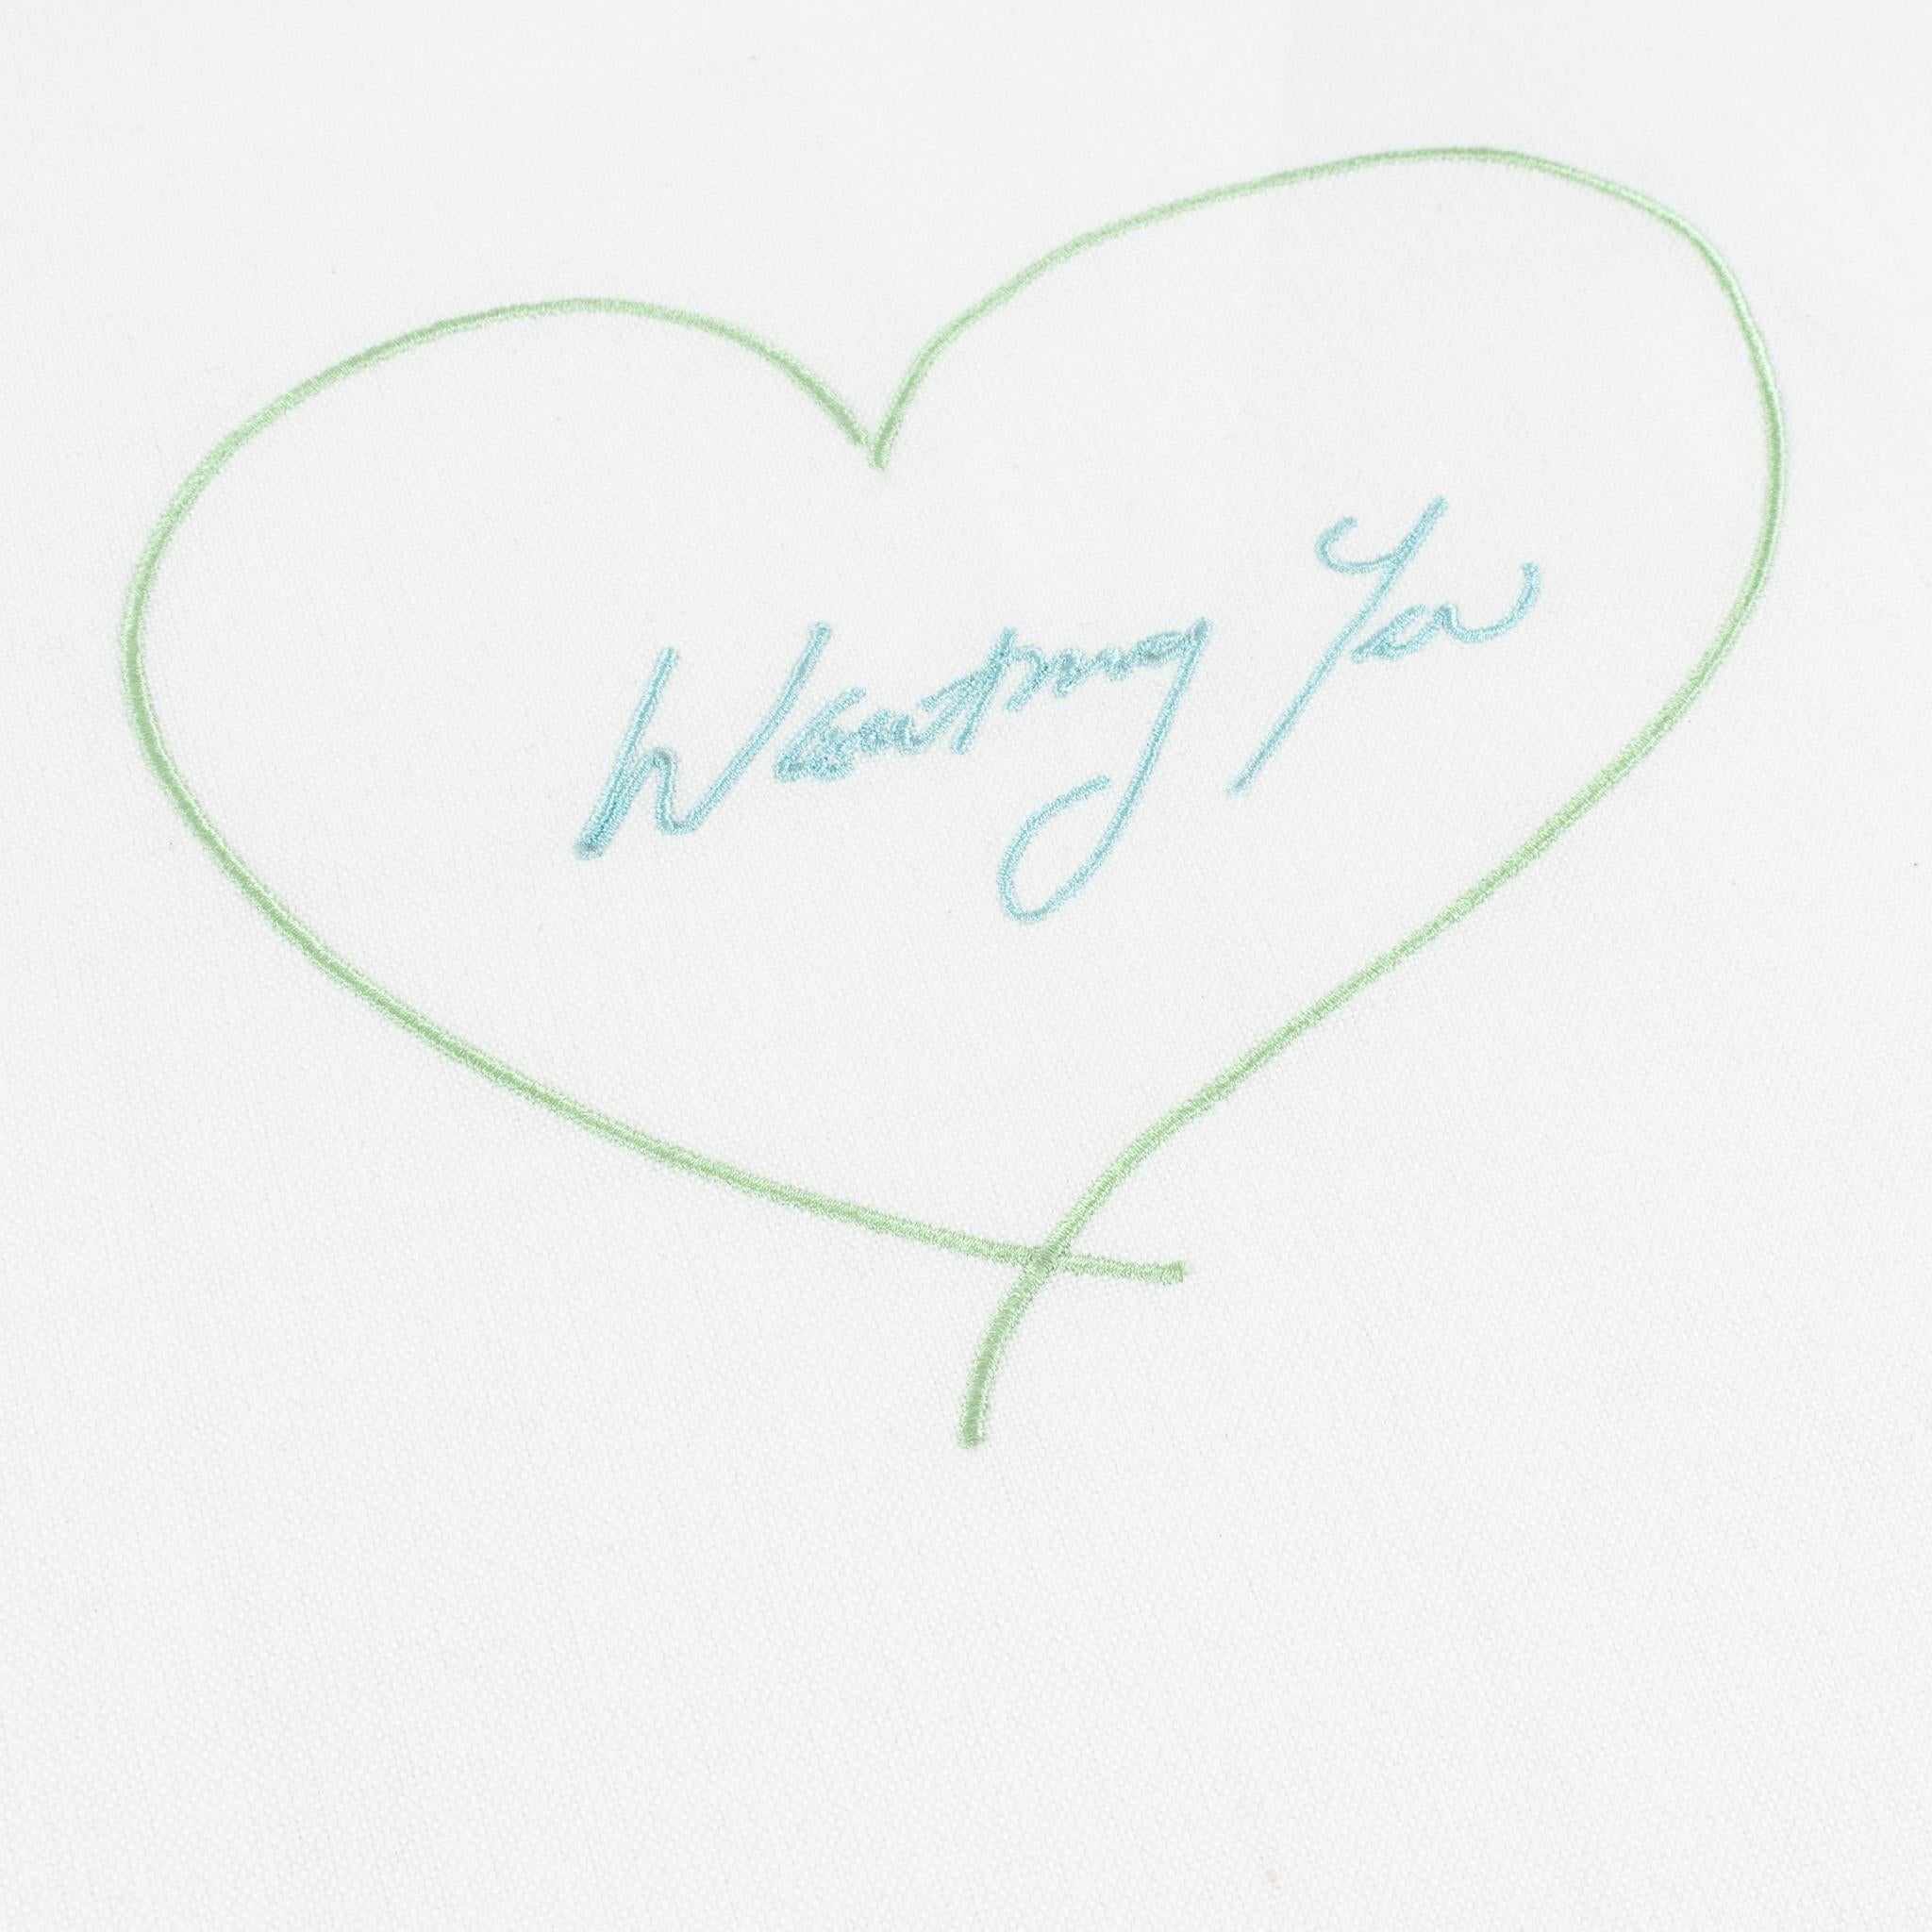 Wanting You (Green and Blue) - Contemporary Print by Tracey Emin